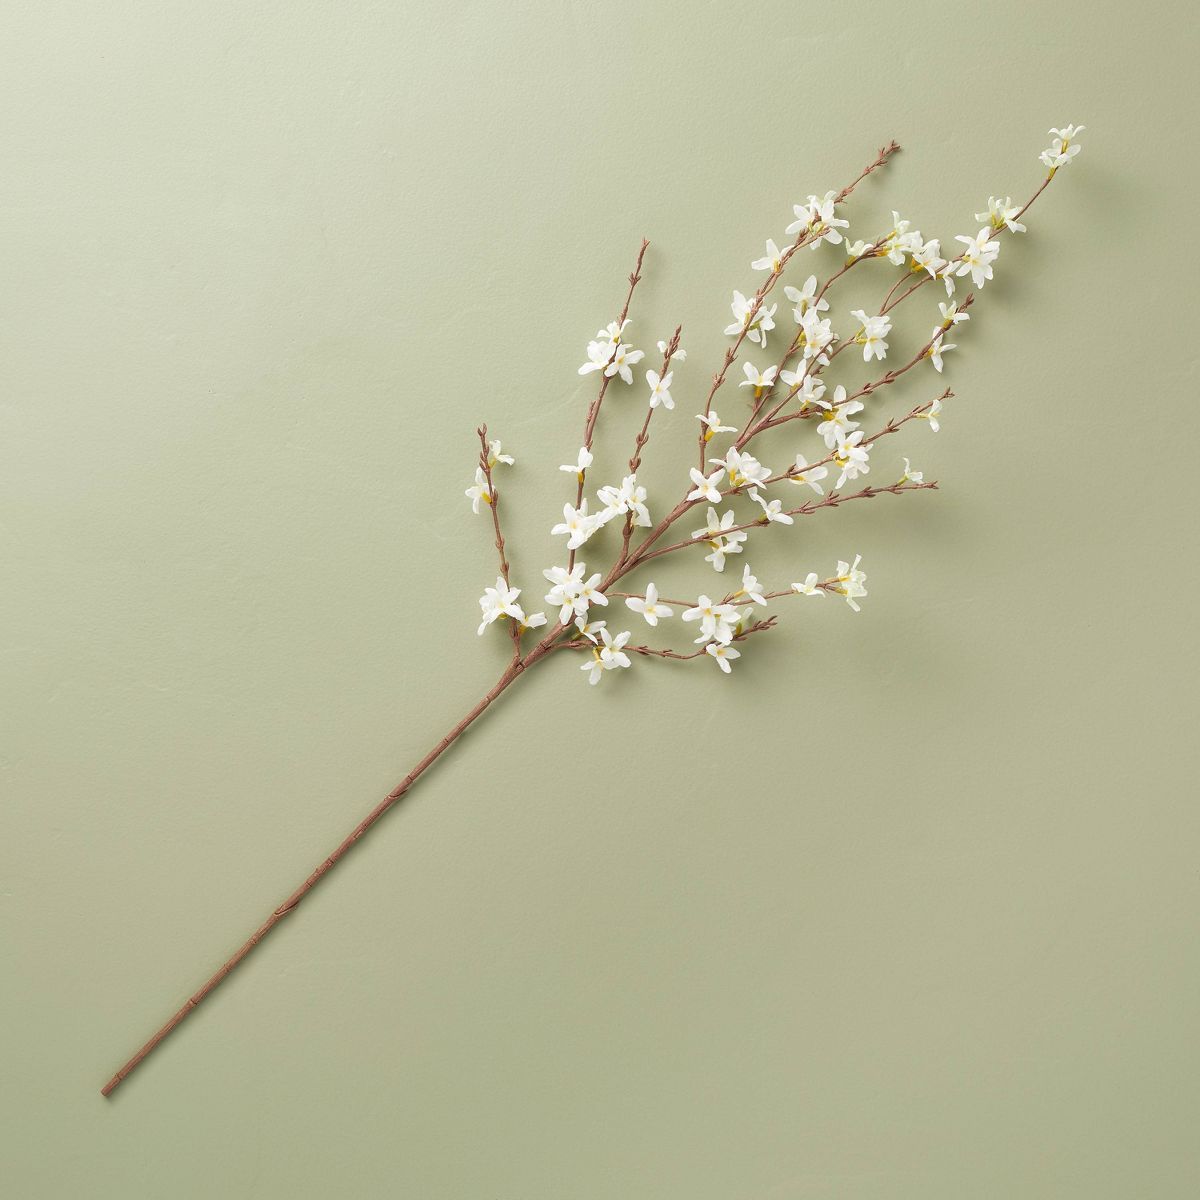 Faux Forsythia Flowering Branch - Hearth & Hand™ with Magnolia | Target